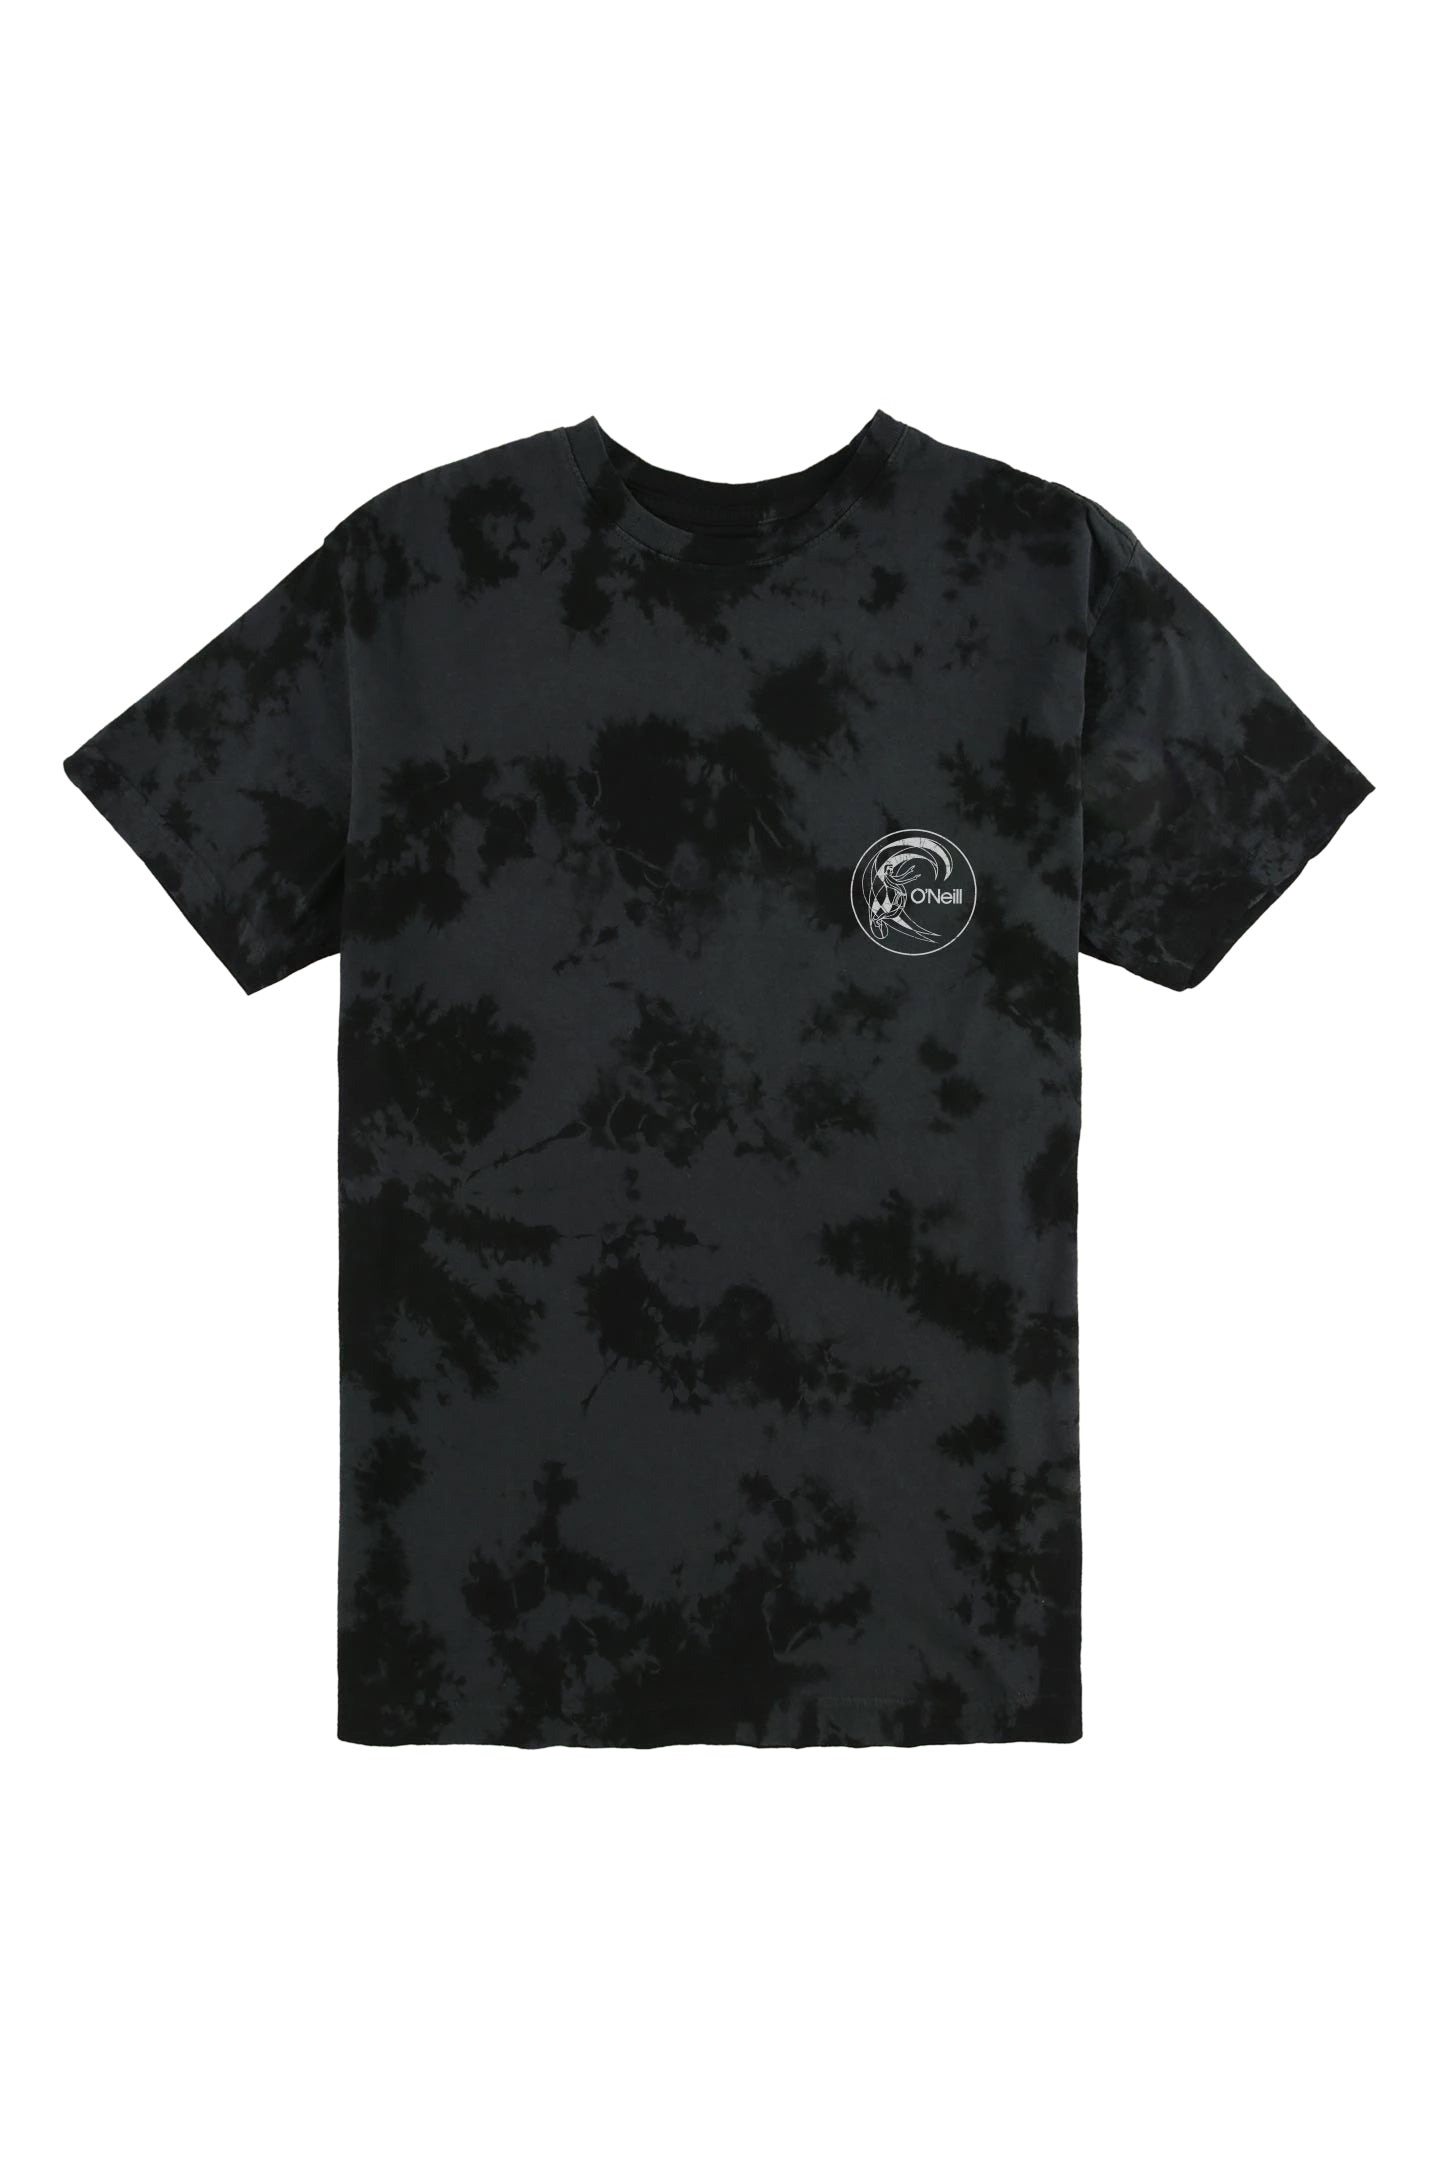 O'neill Psyched Tee